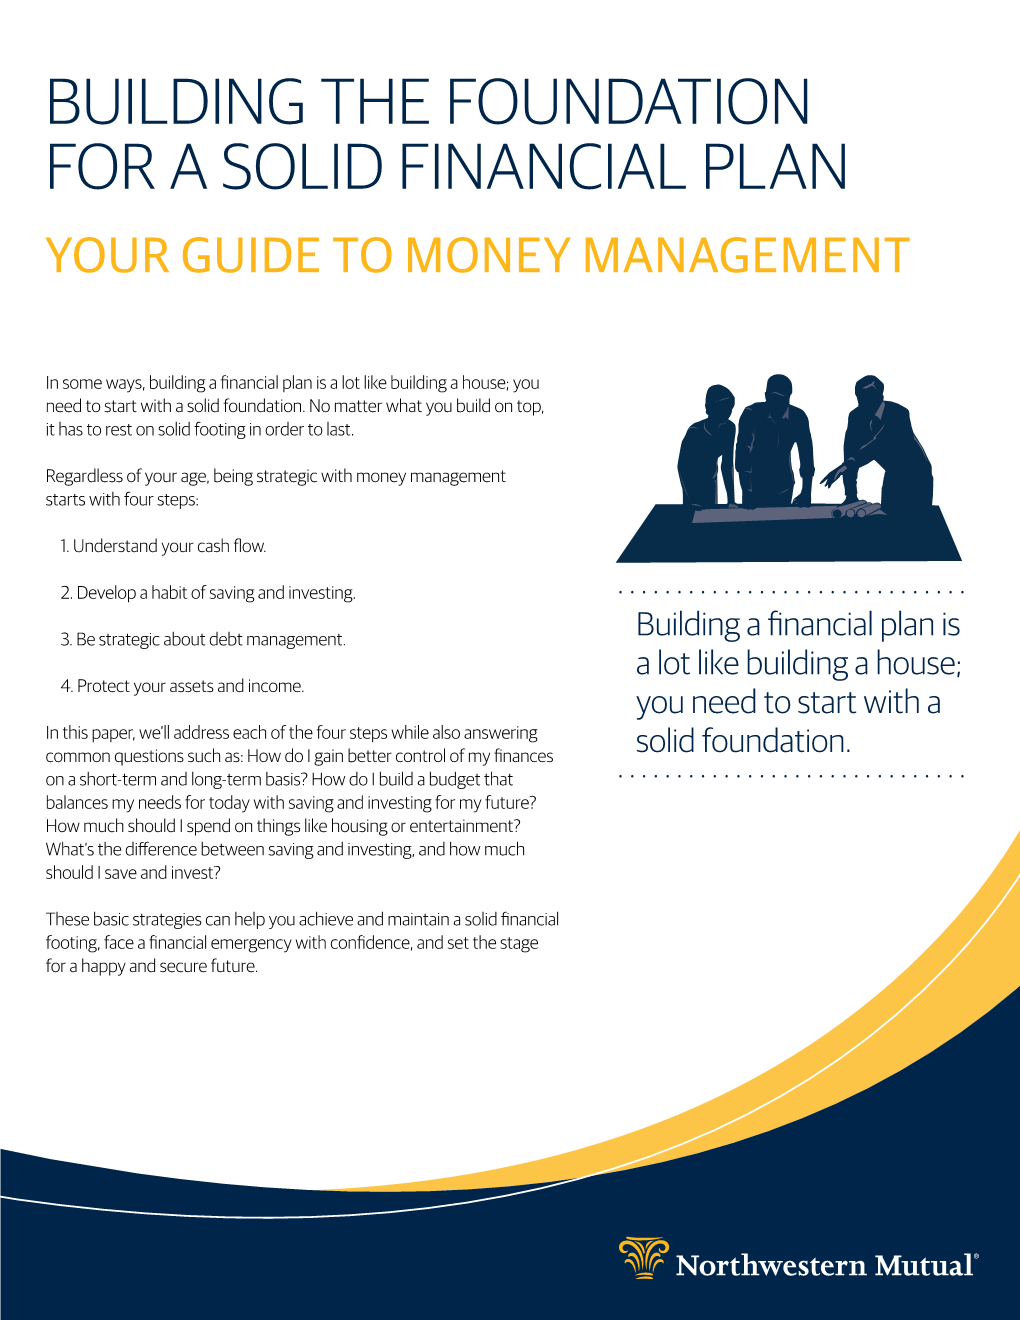 Building the Foundation for a Solid Financial Plan Your Guide to Money Management